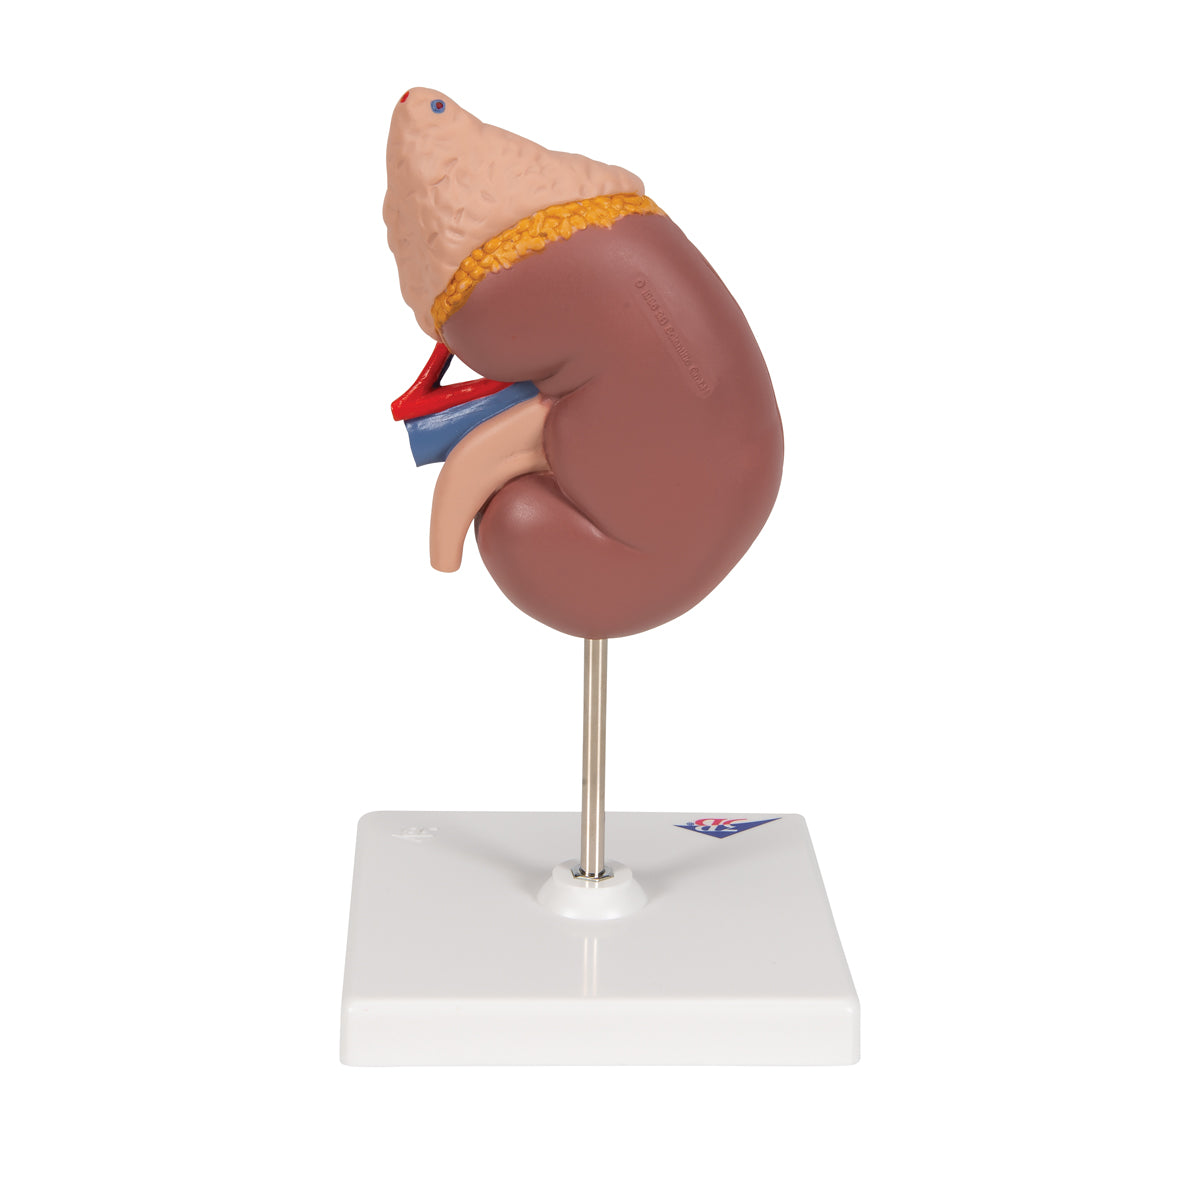 Classic kidney model incl. the adrenal gland where the kidney can be separated into 2 parts